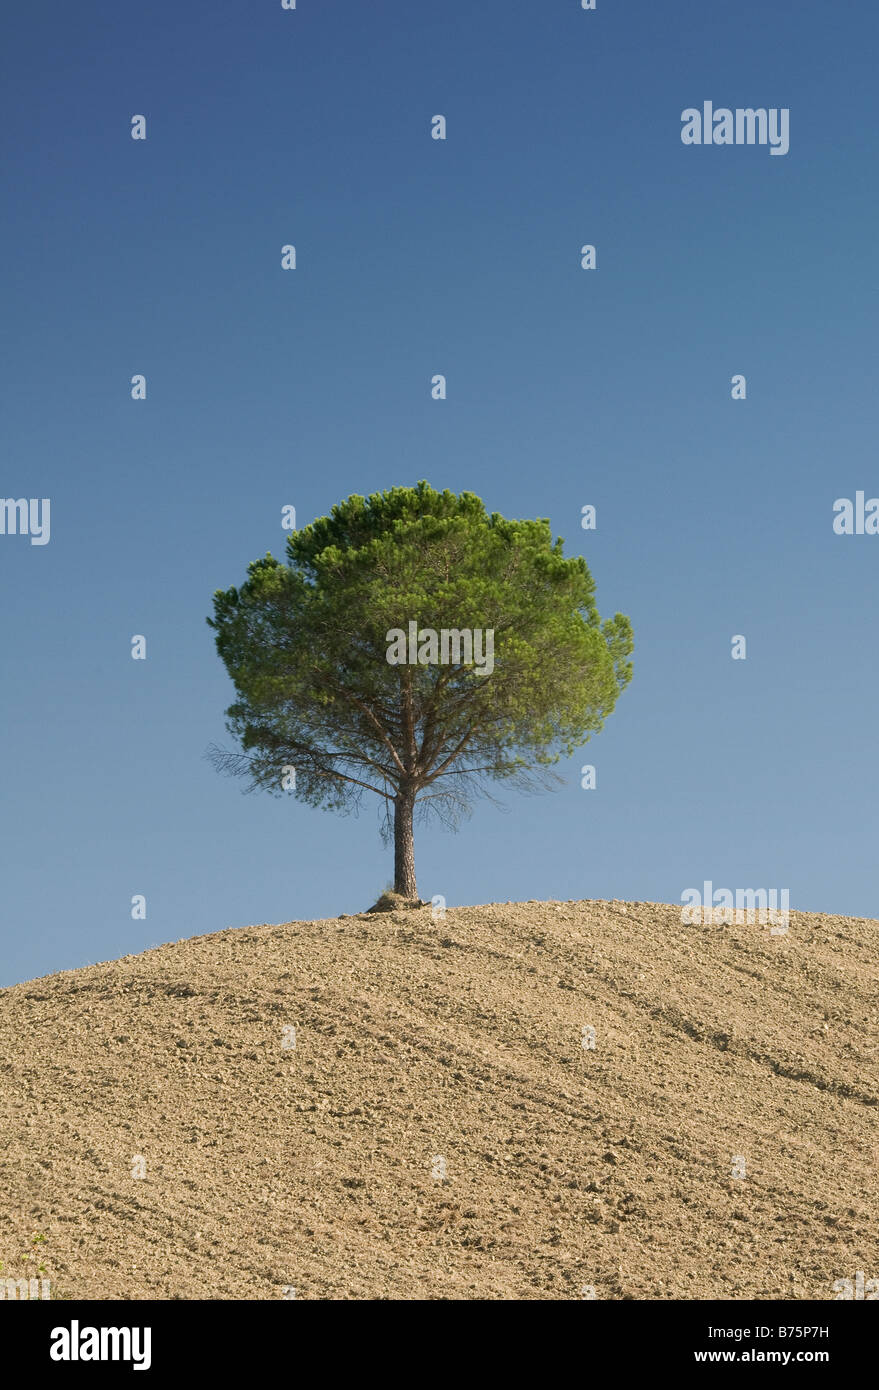 Colourful Image of a single small green tree on top of a pale yellow mound of earth against a blue sky. Stock Photo